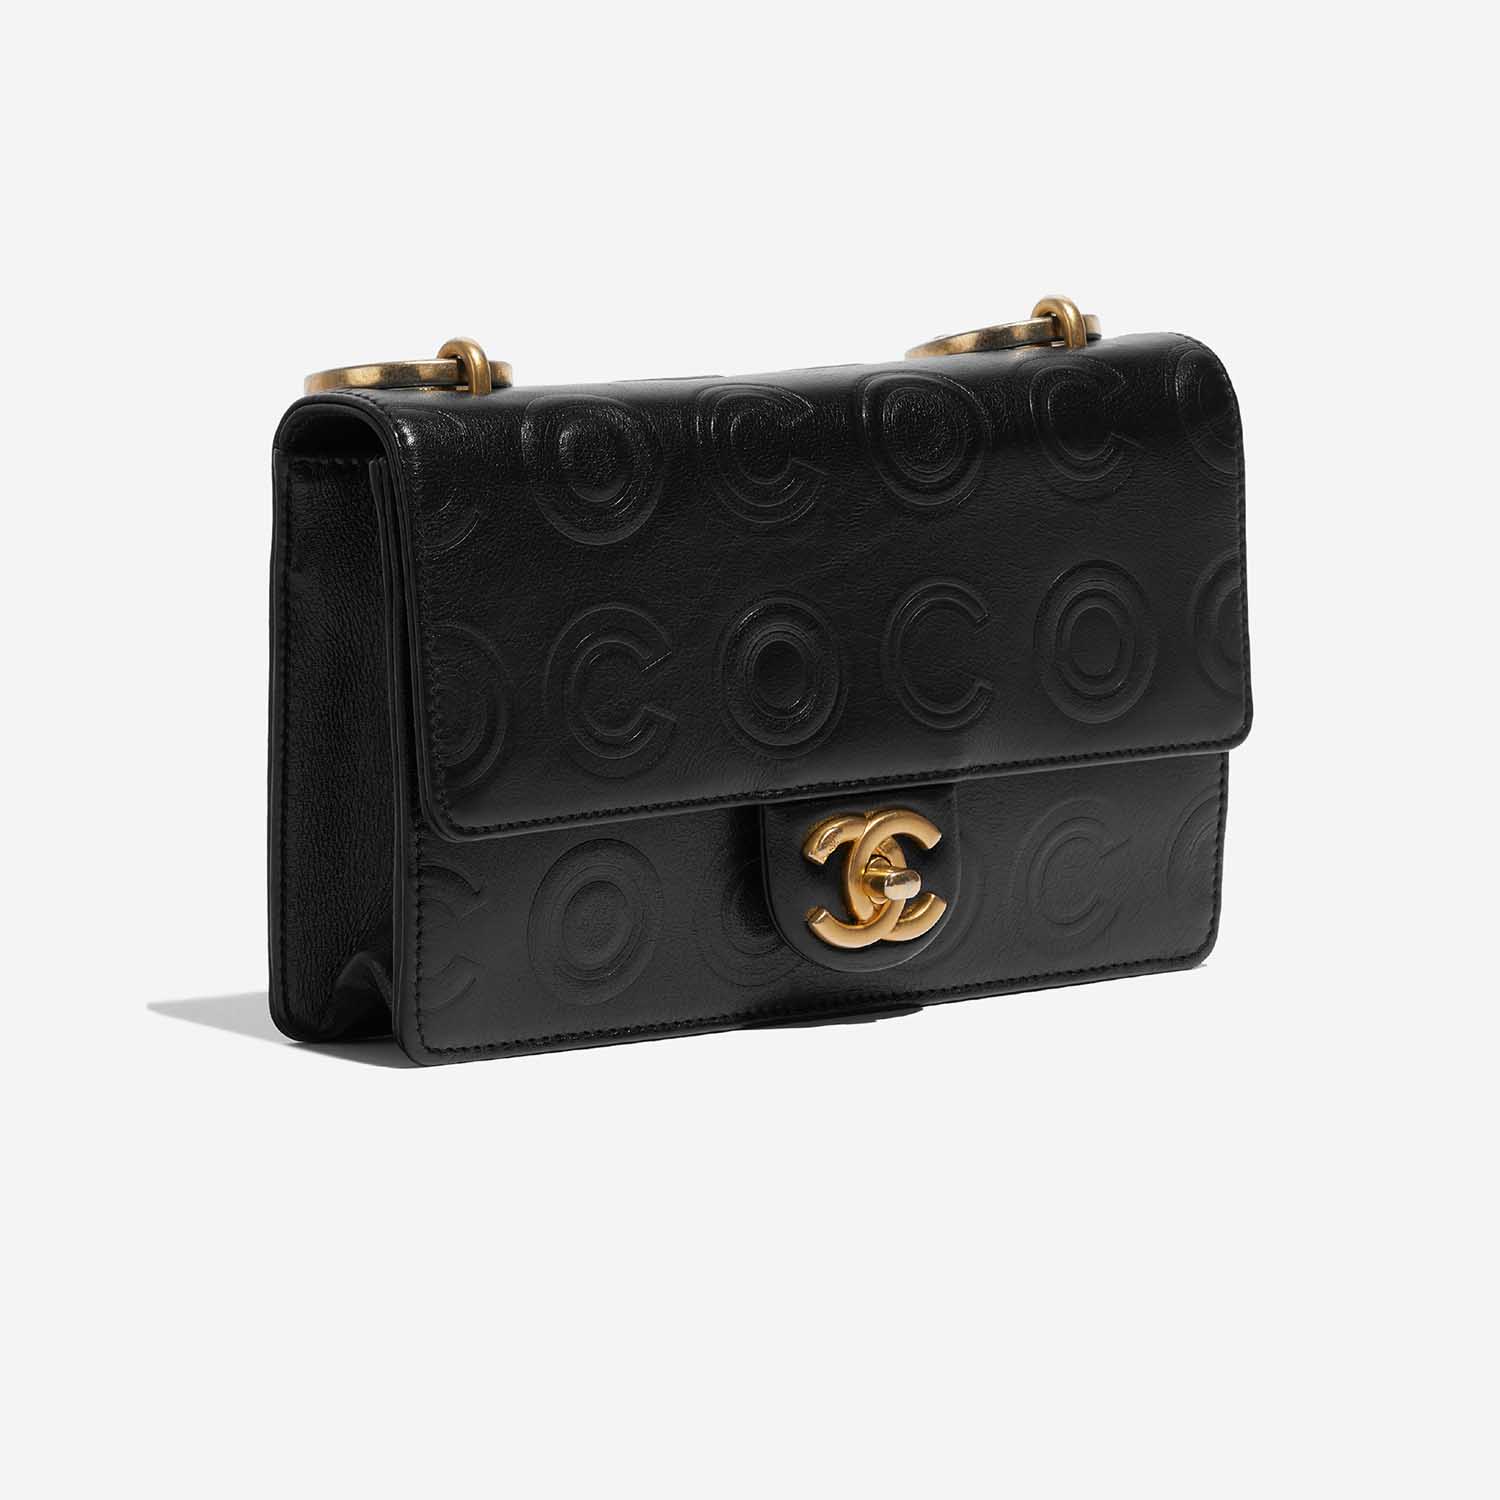 Chanel Timeless Classic 2.55 Jumbo Double Flap Bag in Black Lambskin with  Gold Hardware - SOLD